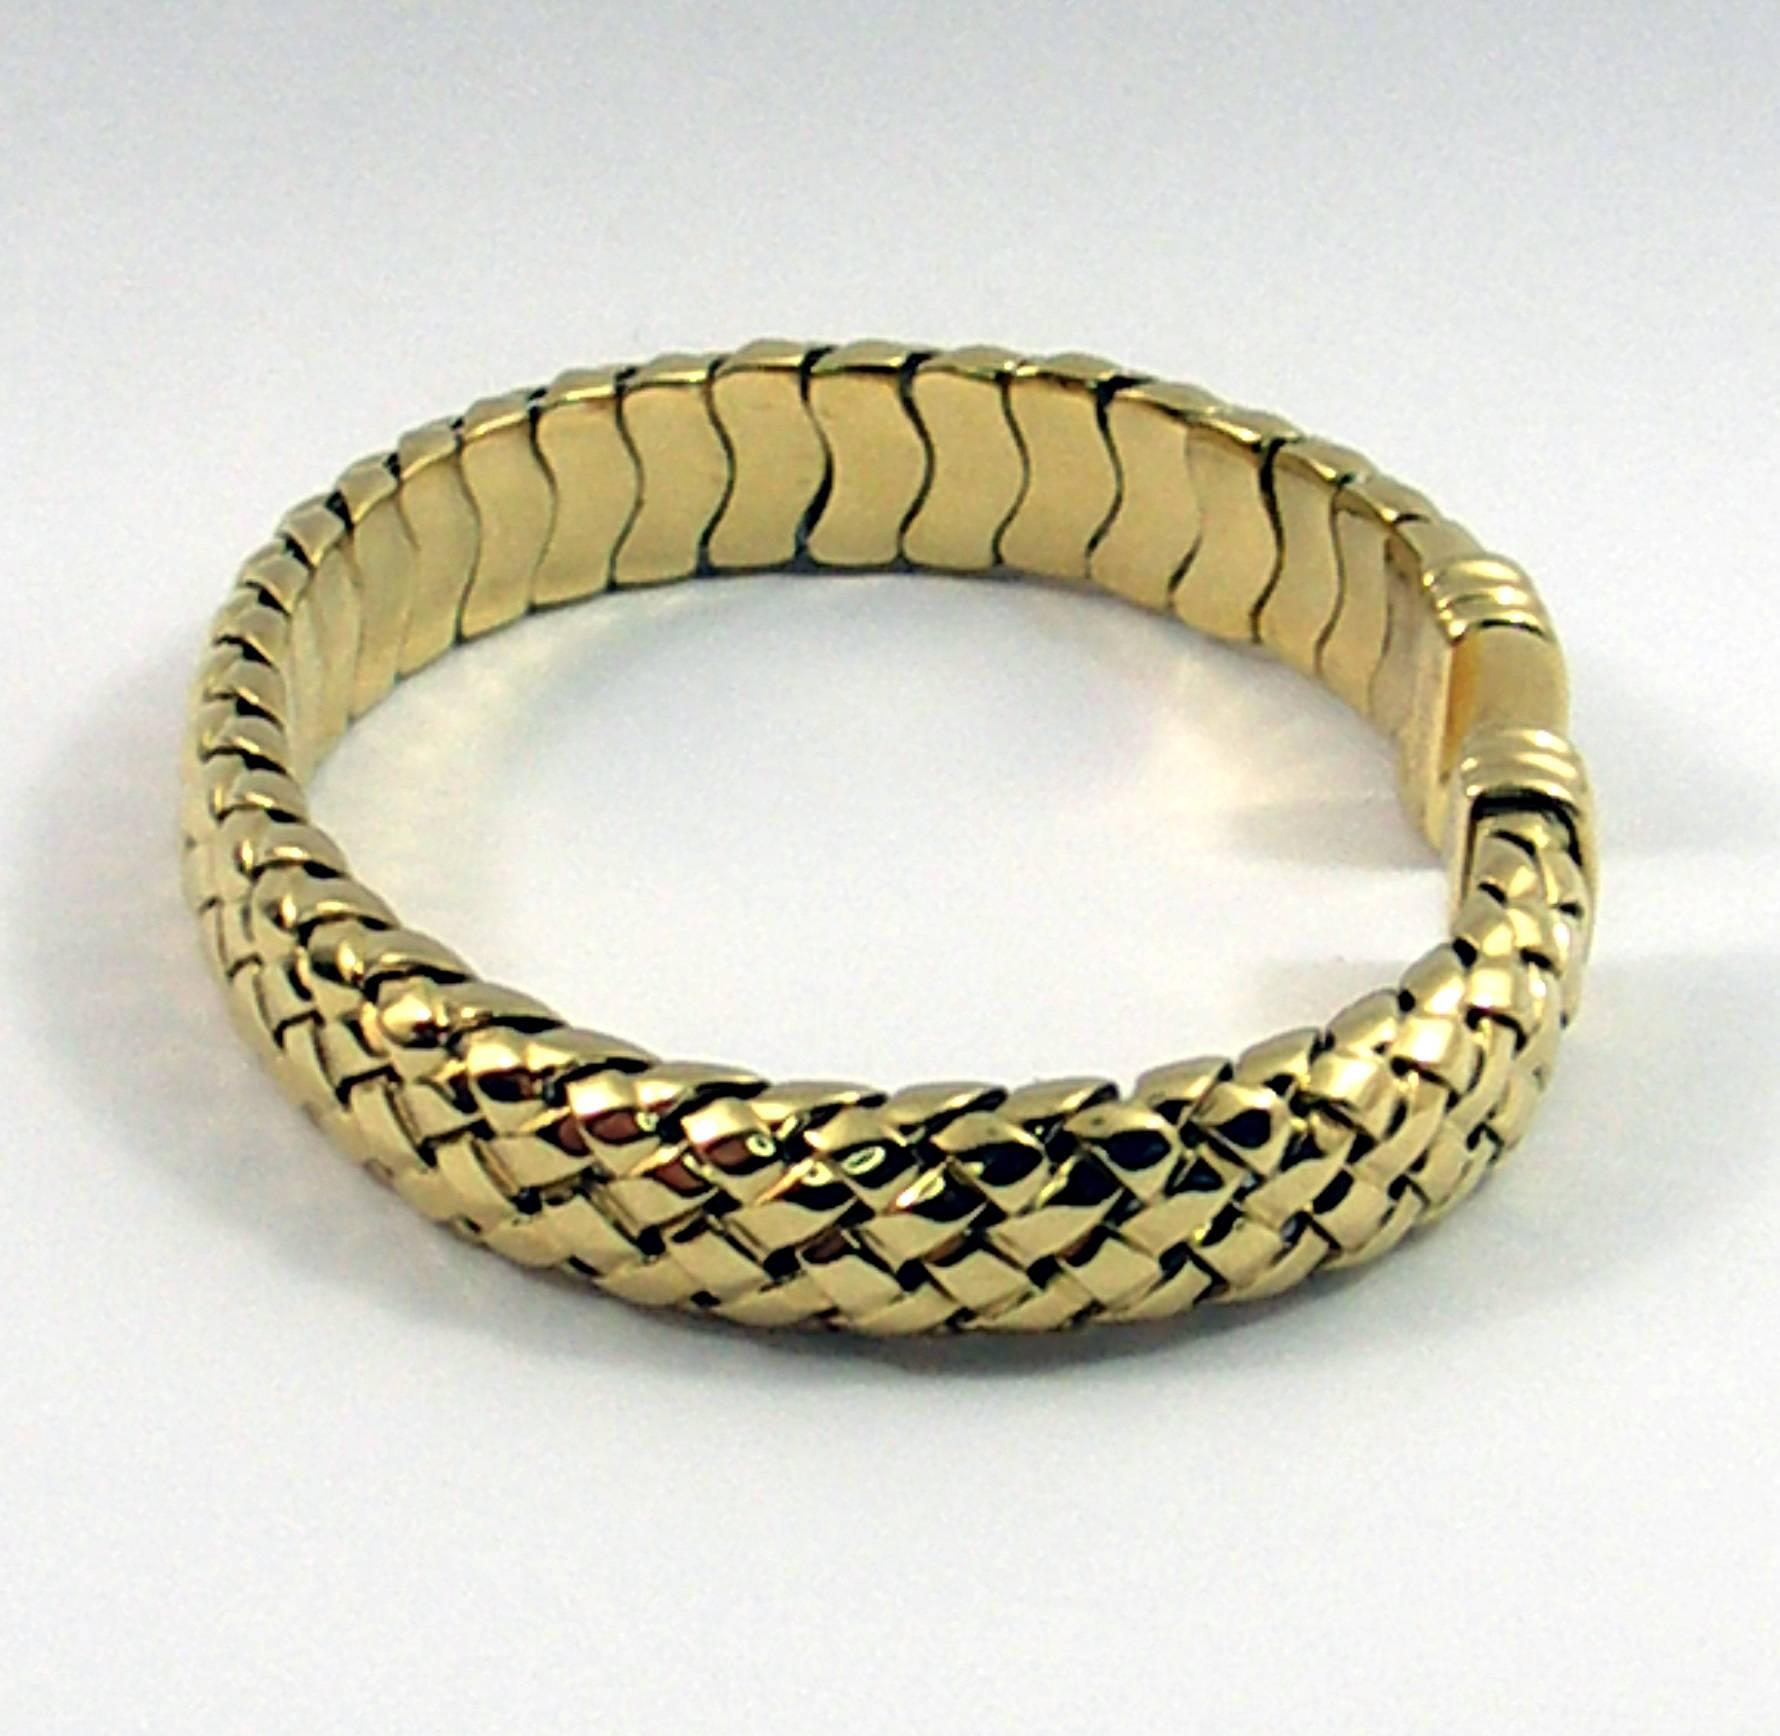 18K yellow gold woven design bracelet measuring 9.5mm wide, inside circumference 6 inches. Signed Tiffany & Co.